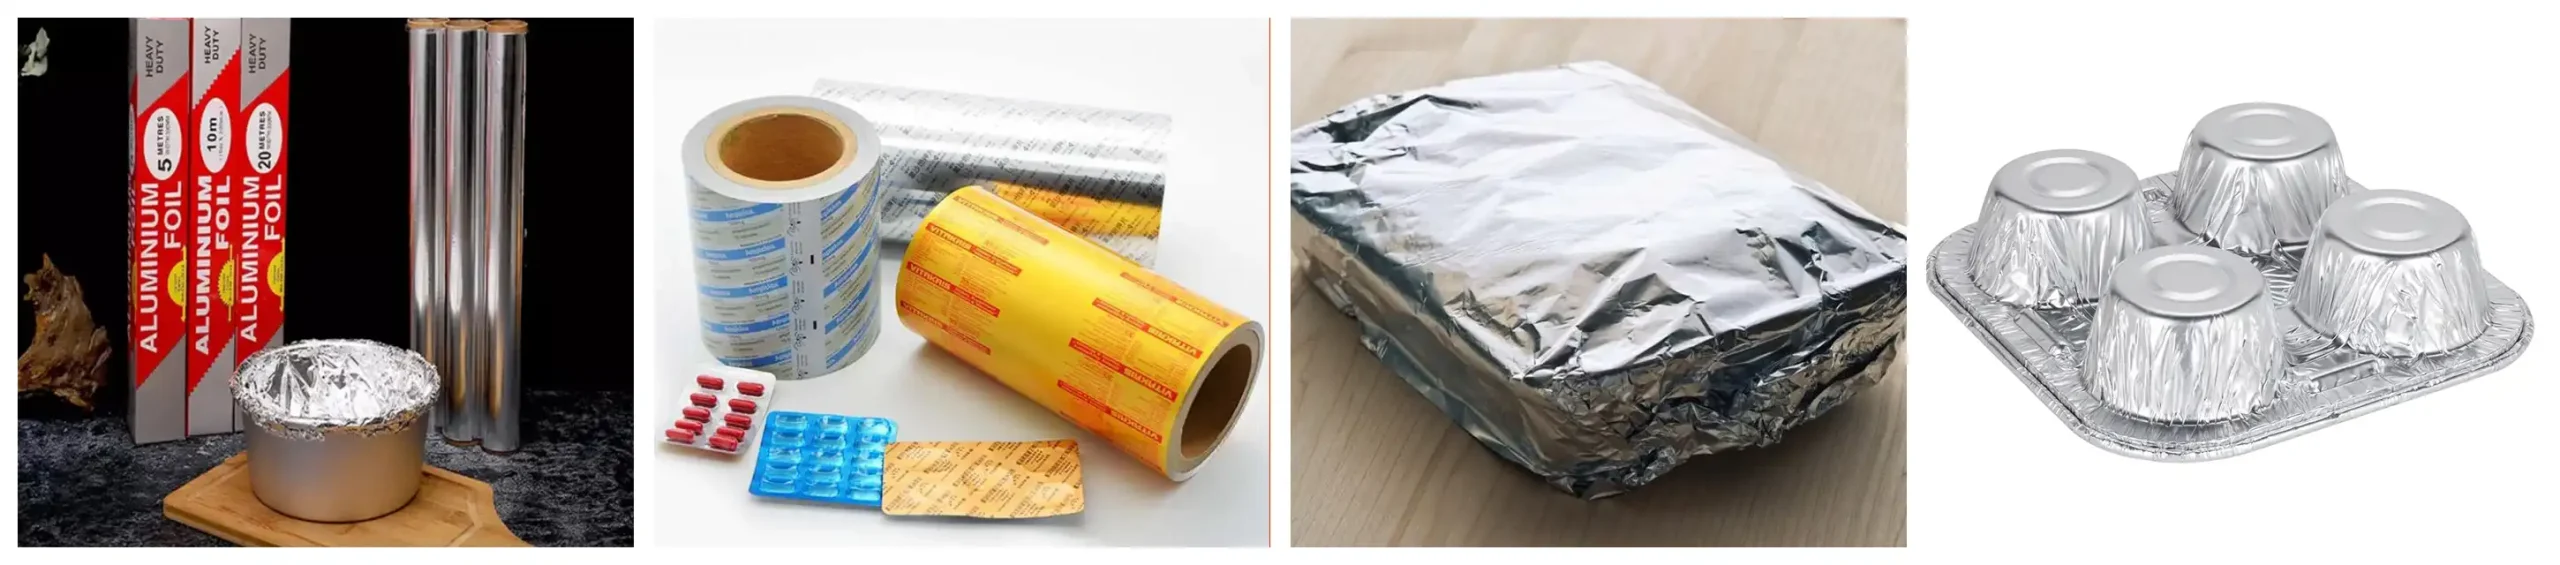 8011 aluminum foil for food and beverage package, wrapping food items, sealing containers, creating pouches, and manufacturing lids, blister packs, medicine bottle caps, and other medication packaging needs